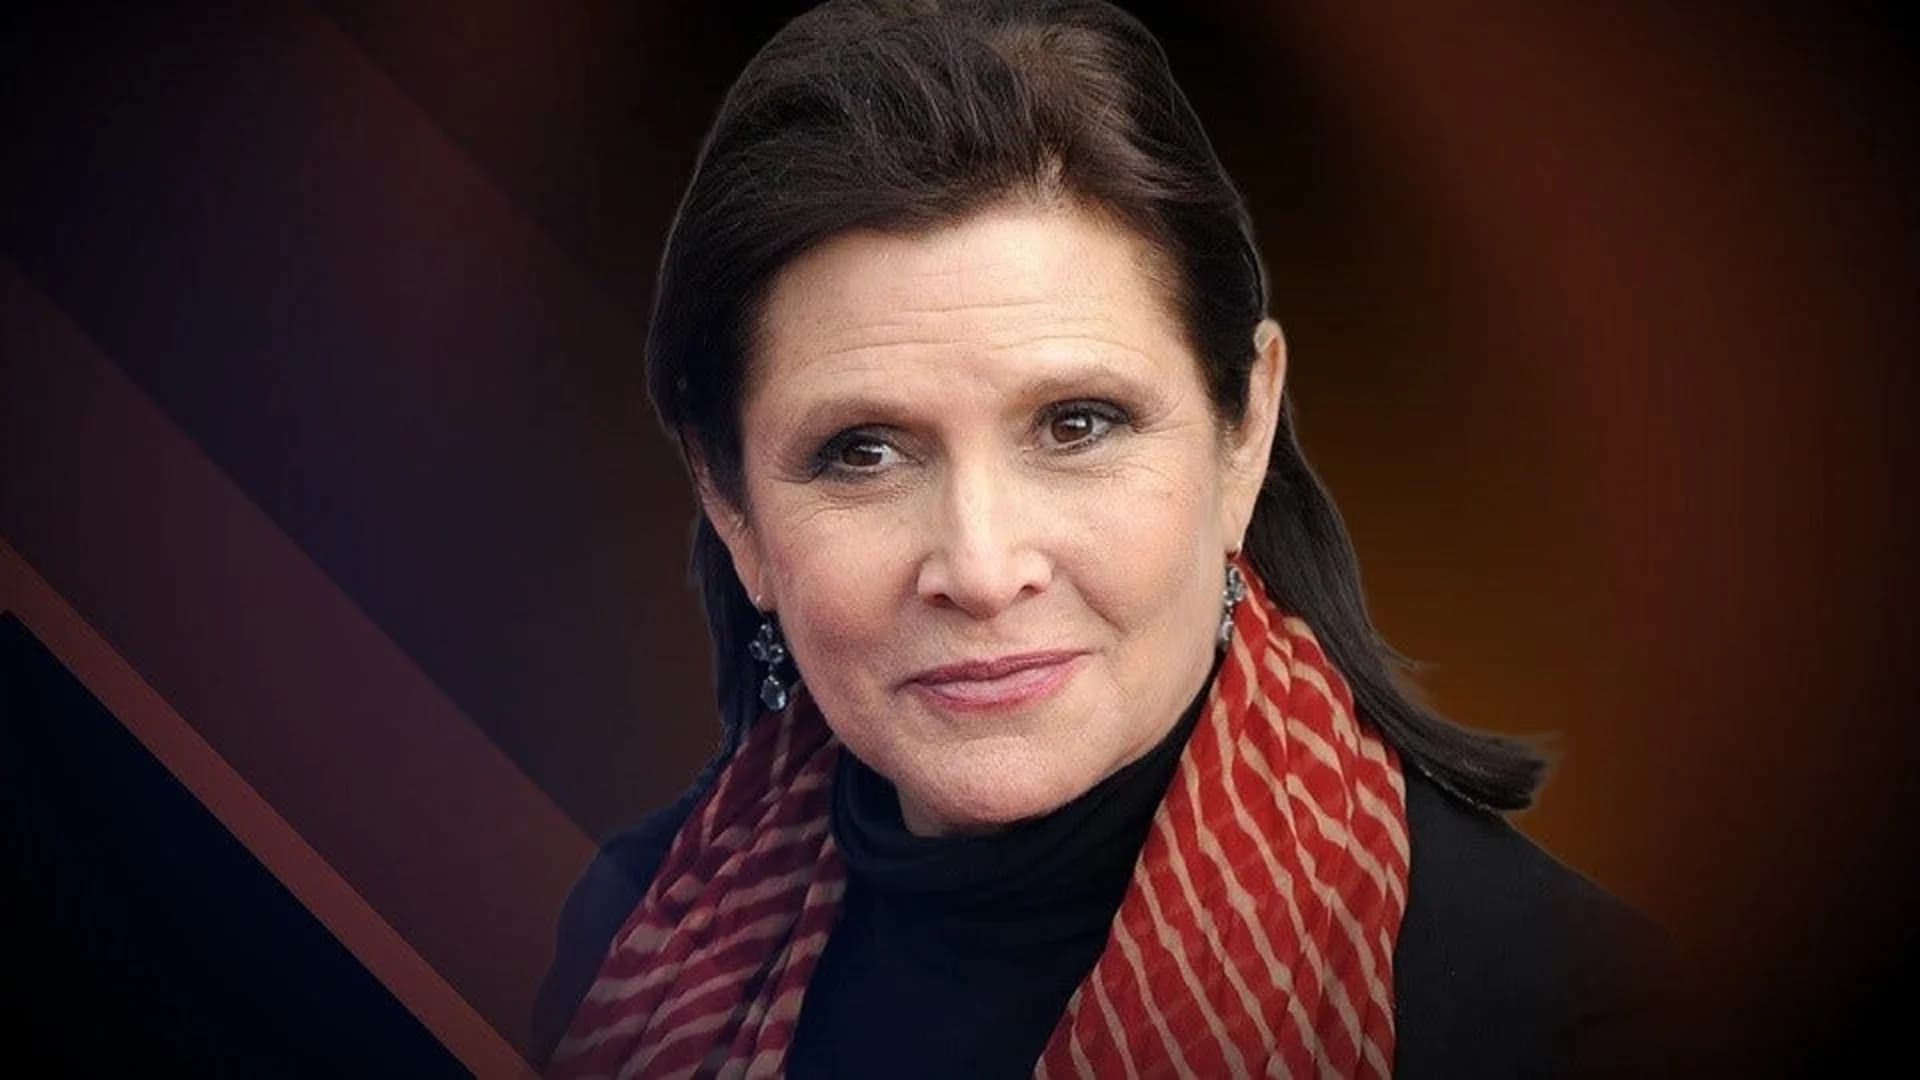 Officials: Actress Carrie Fisher died from sleep apnea, other factors